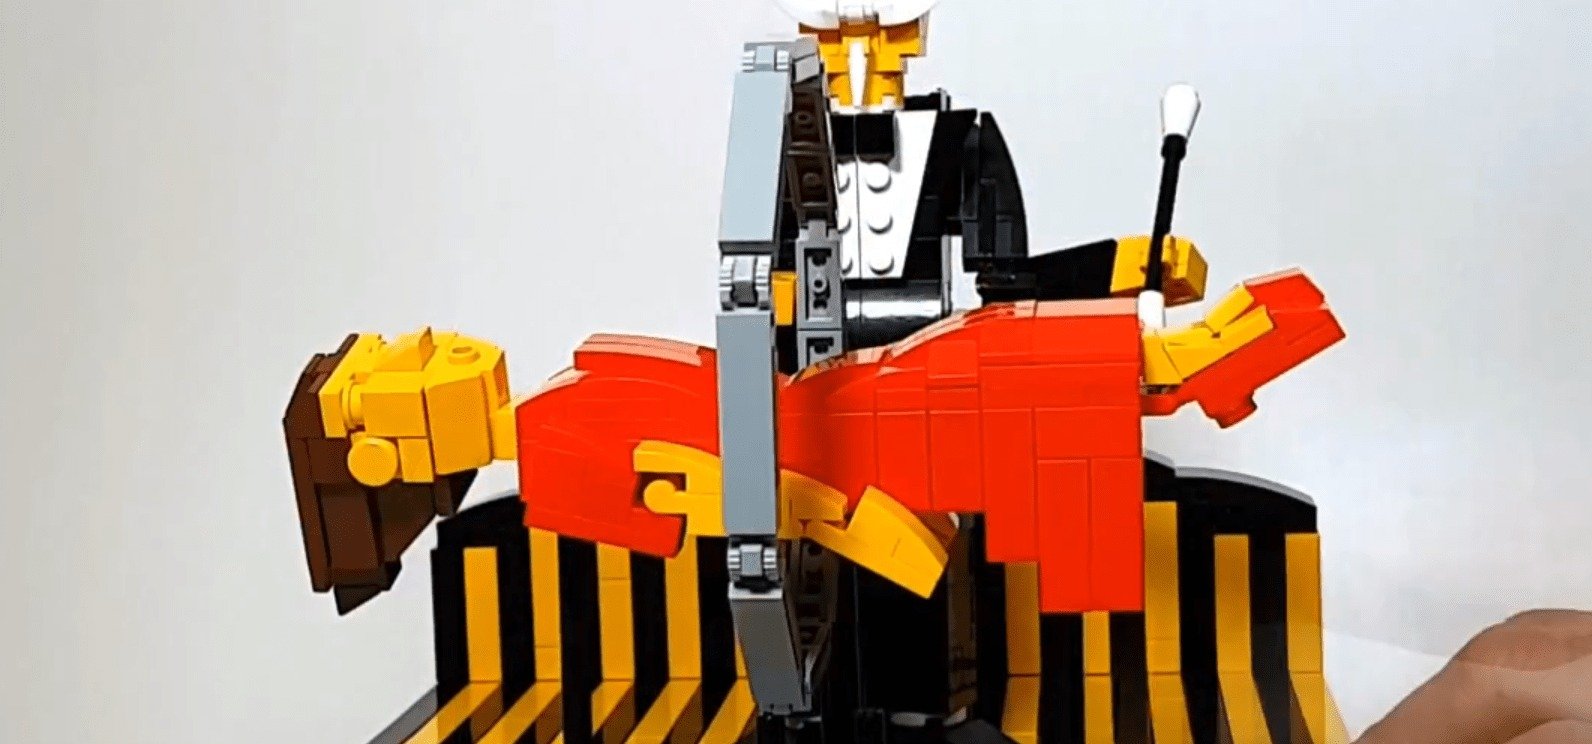 Magic brought to life in the illusionist, a LEGO automaton